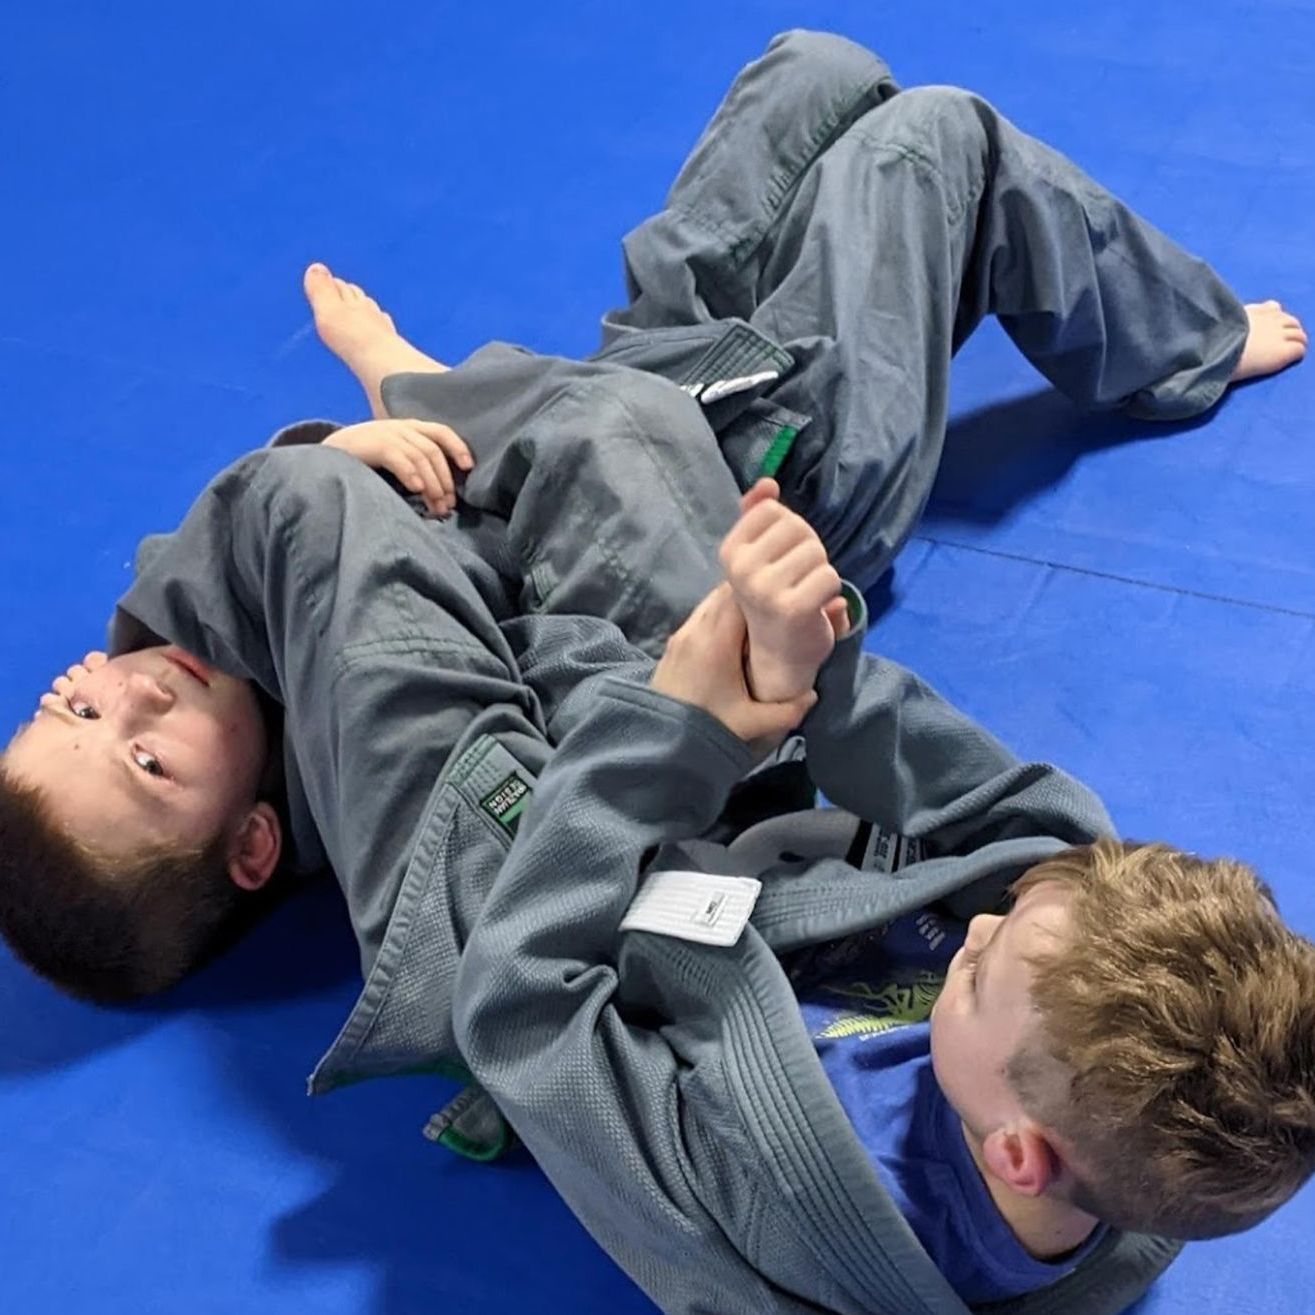 Two boys are wrestling on a blue mat